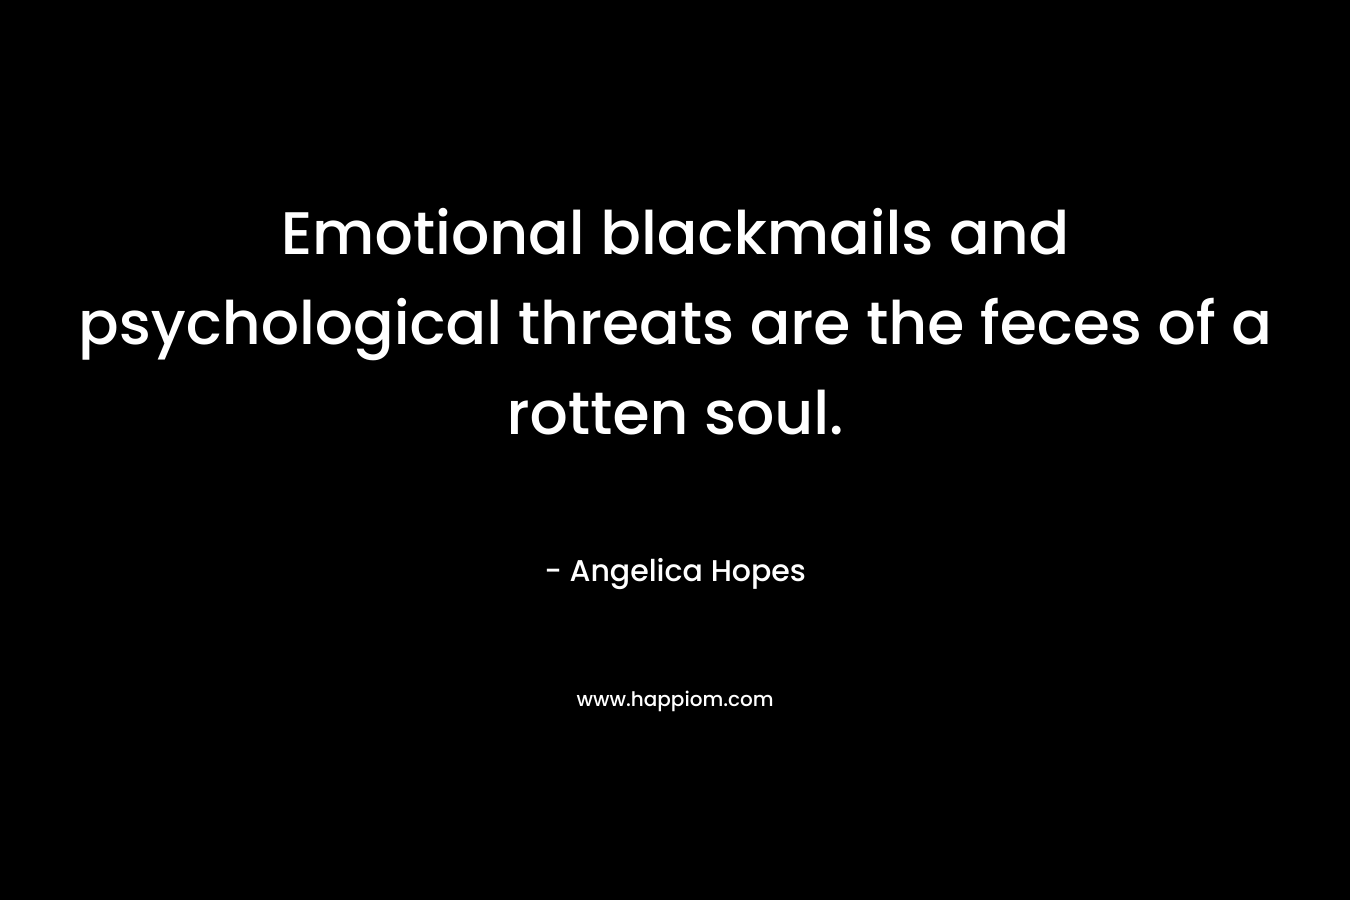 Emotional blackmails and psychological threats are the feces of a rotten soul. – Angelica Hopes